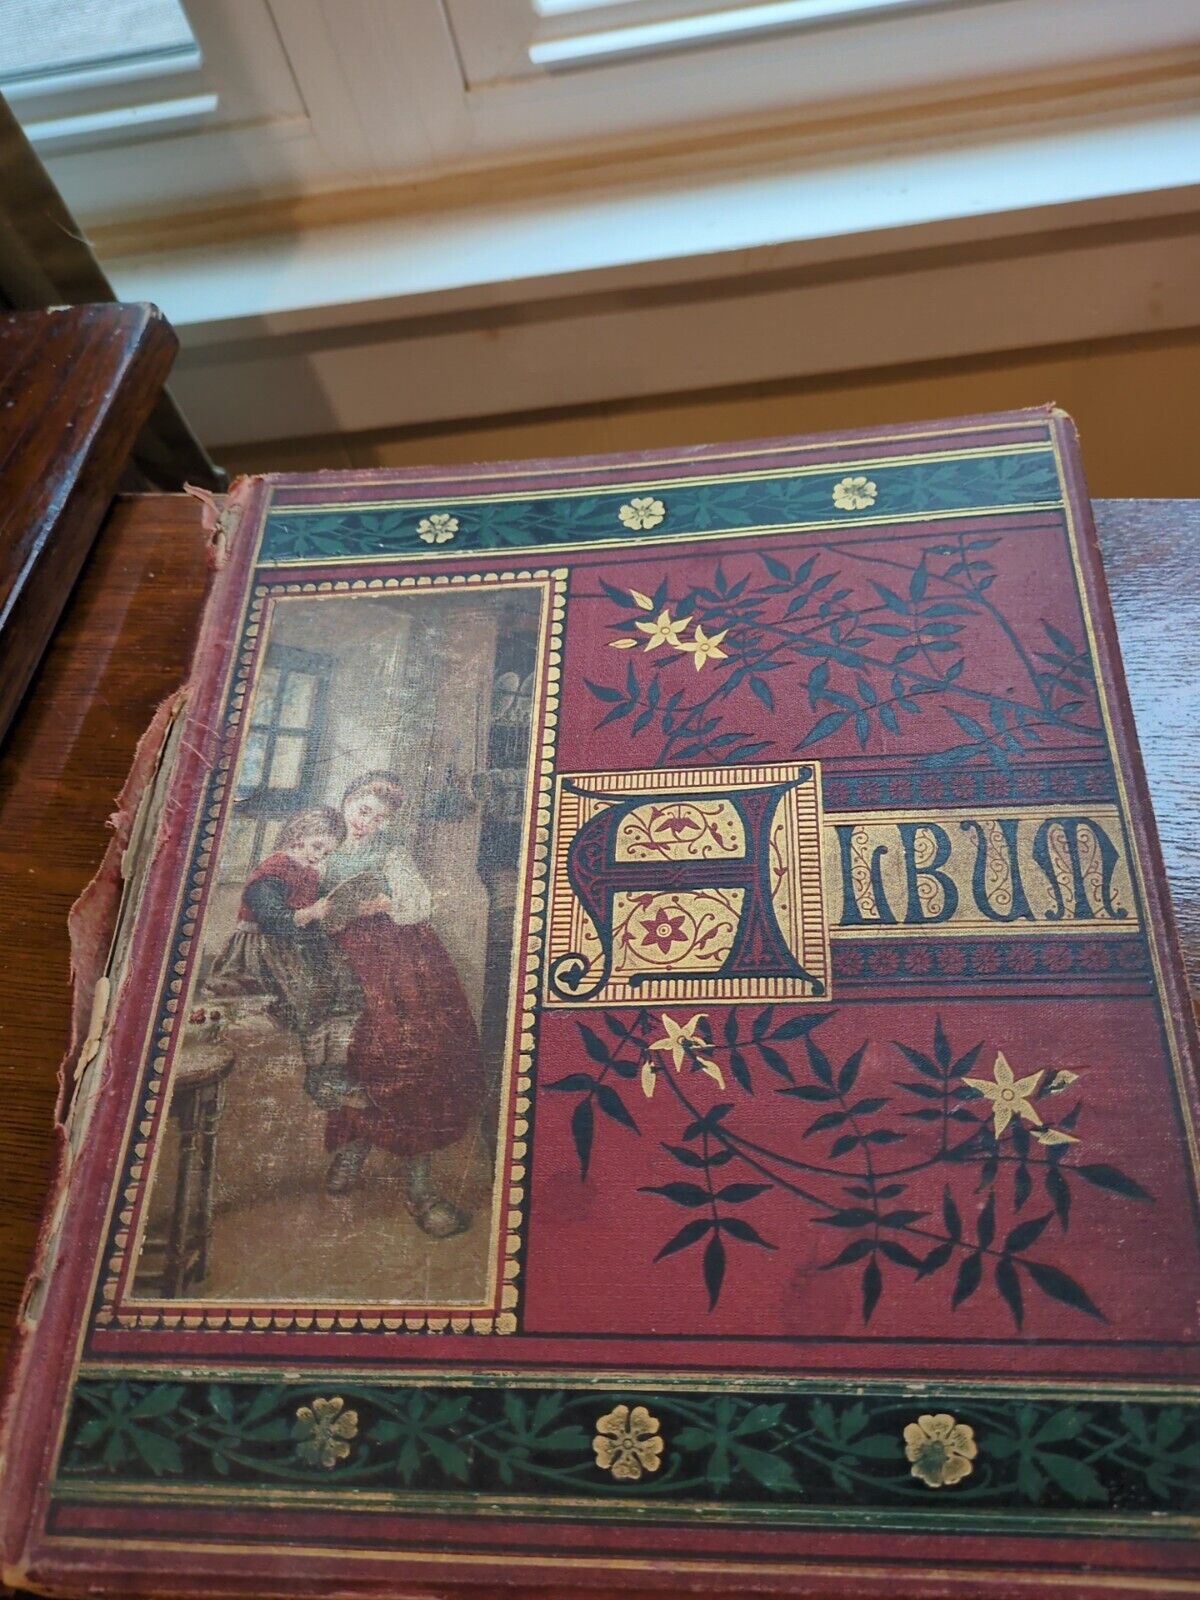 Antique Scrapbook Album With Clippings Looks To Be Late 1800s Early 1900.